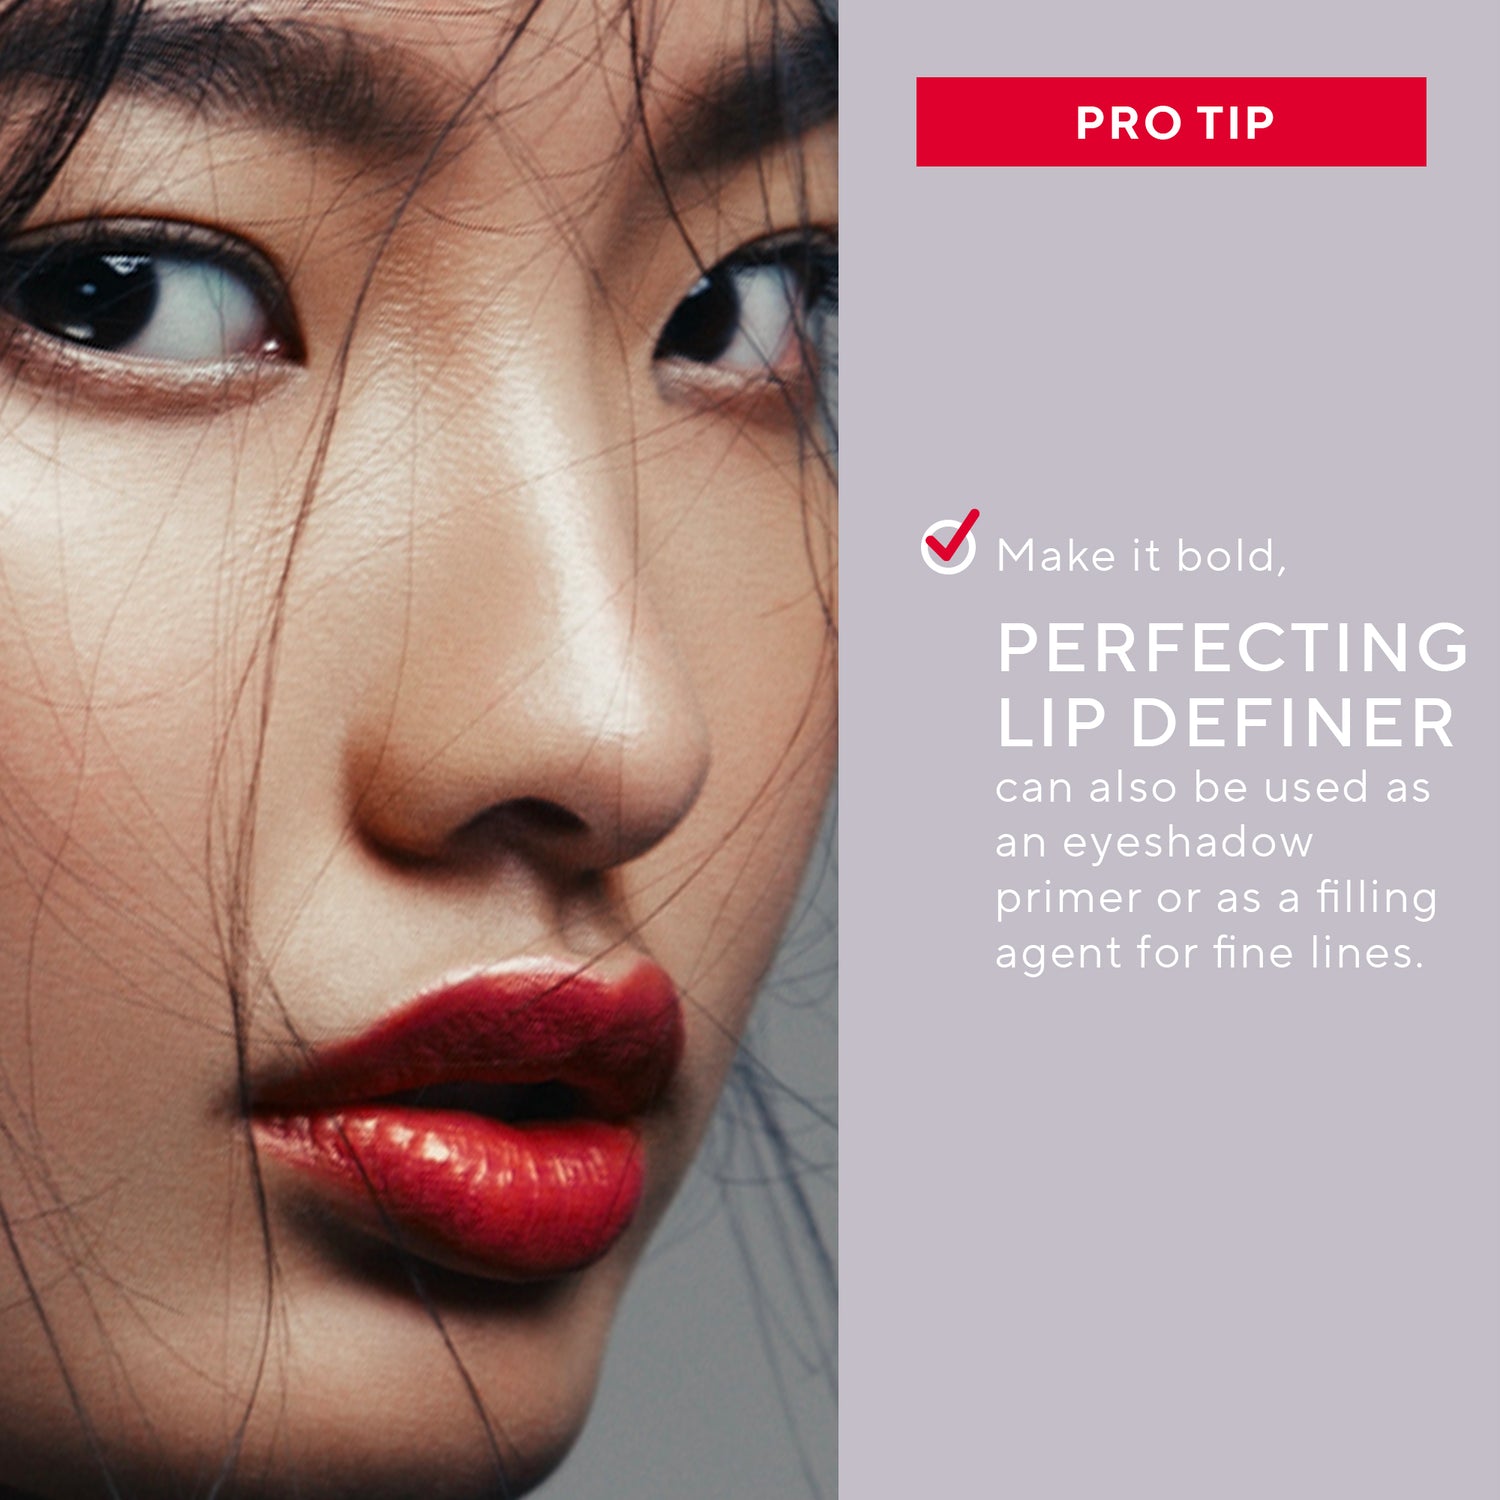 Perfecting Lip Definer - Clear Lip Liner pencil to prevent feathering and lock lip color in place